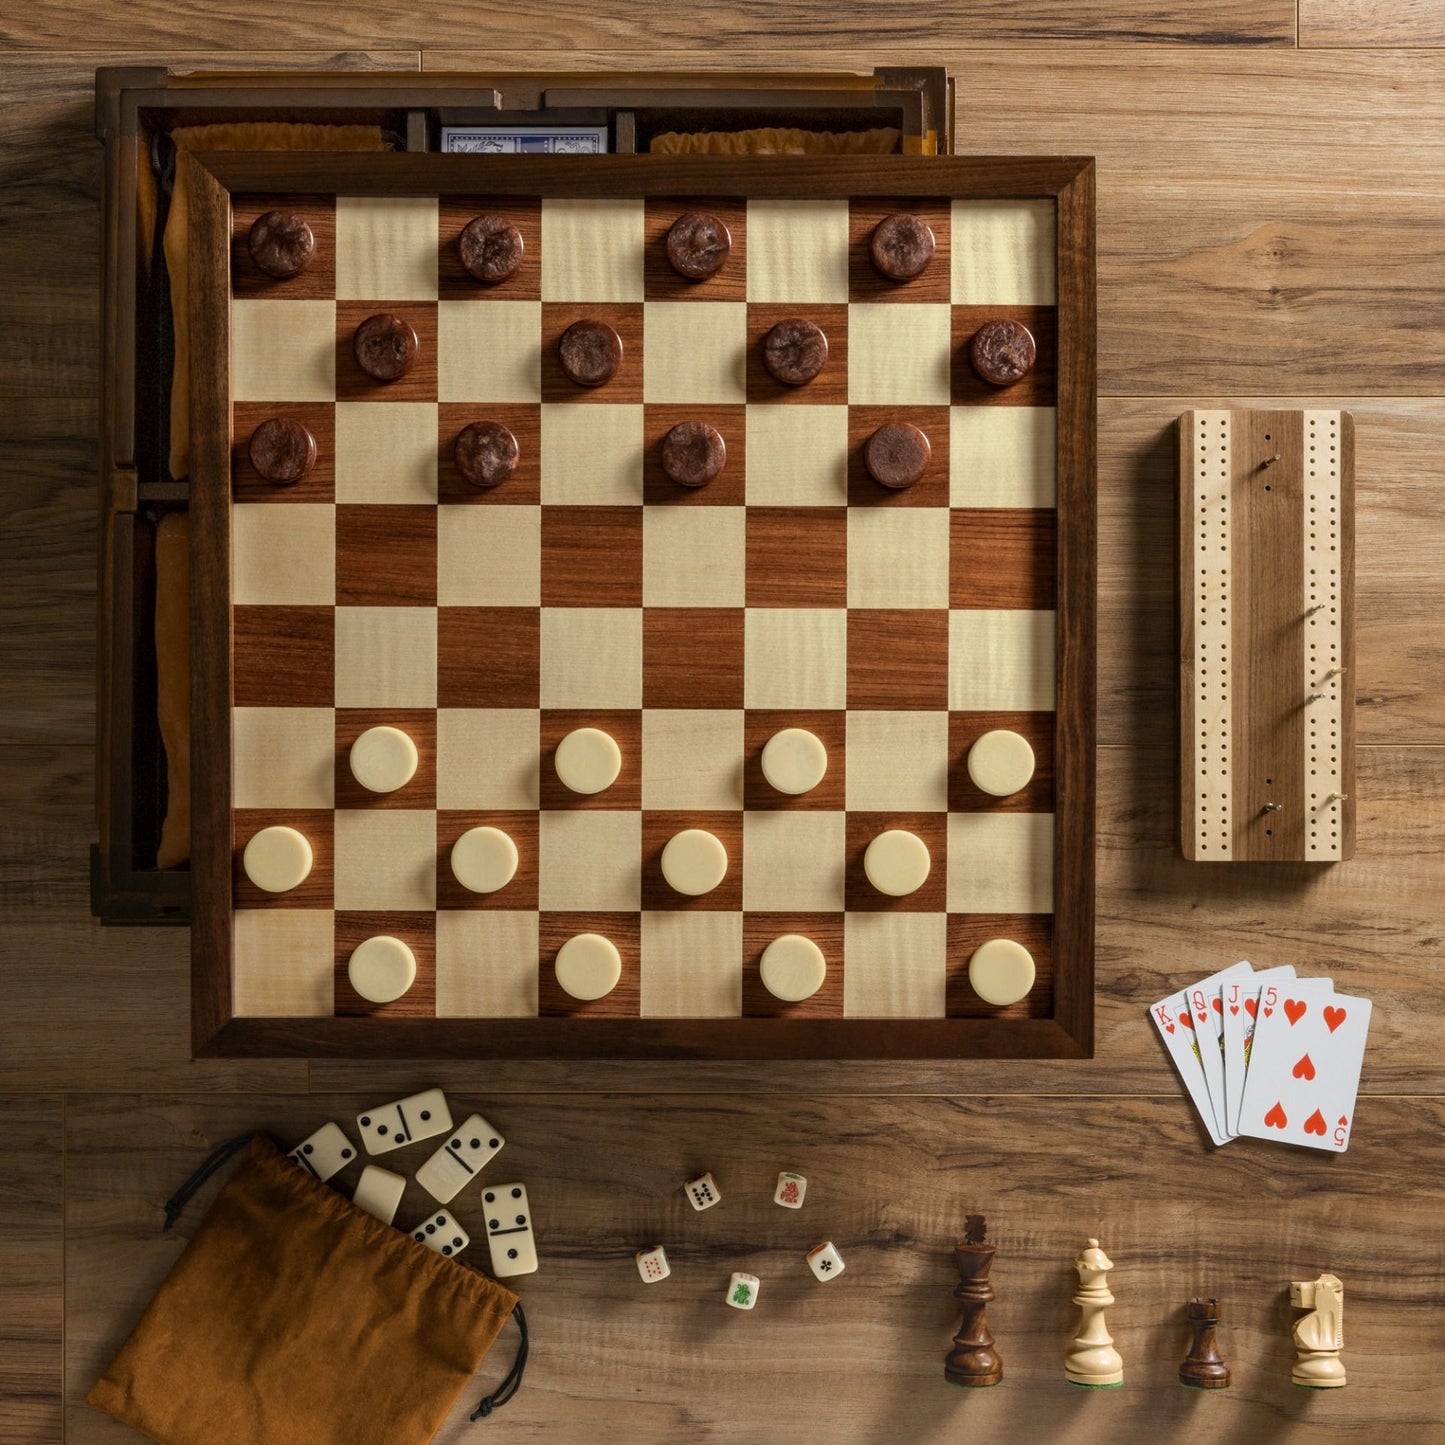 Chess 7-in-1 Heirloom Edition